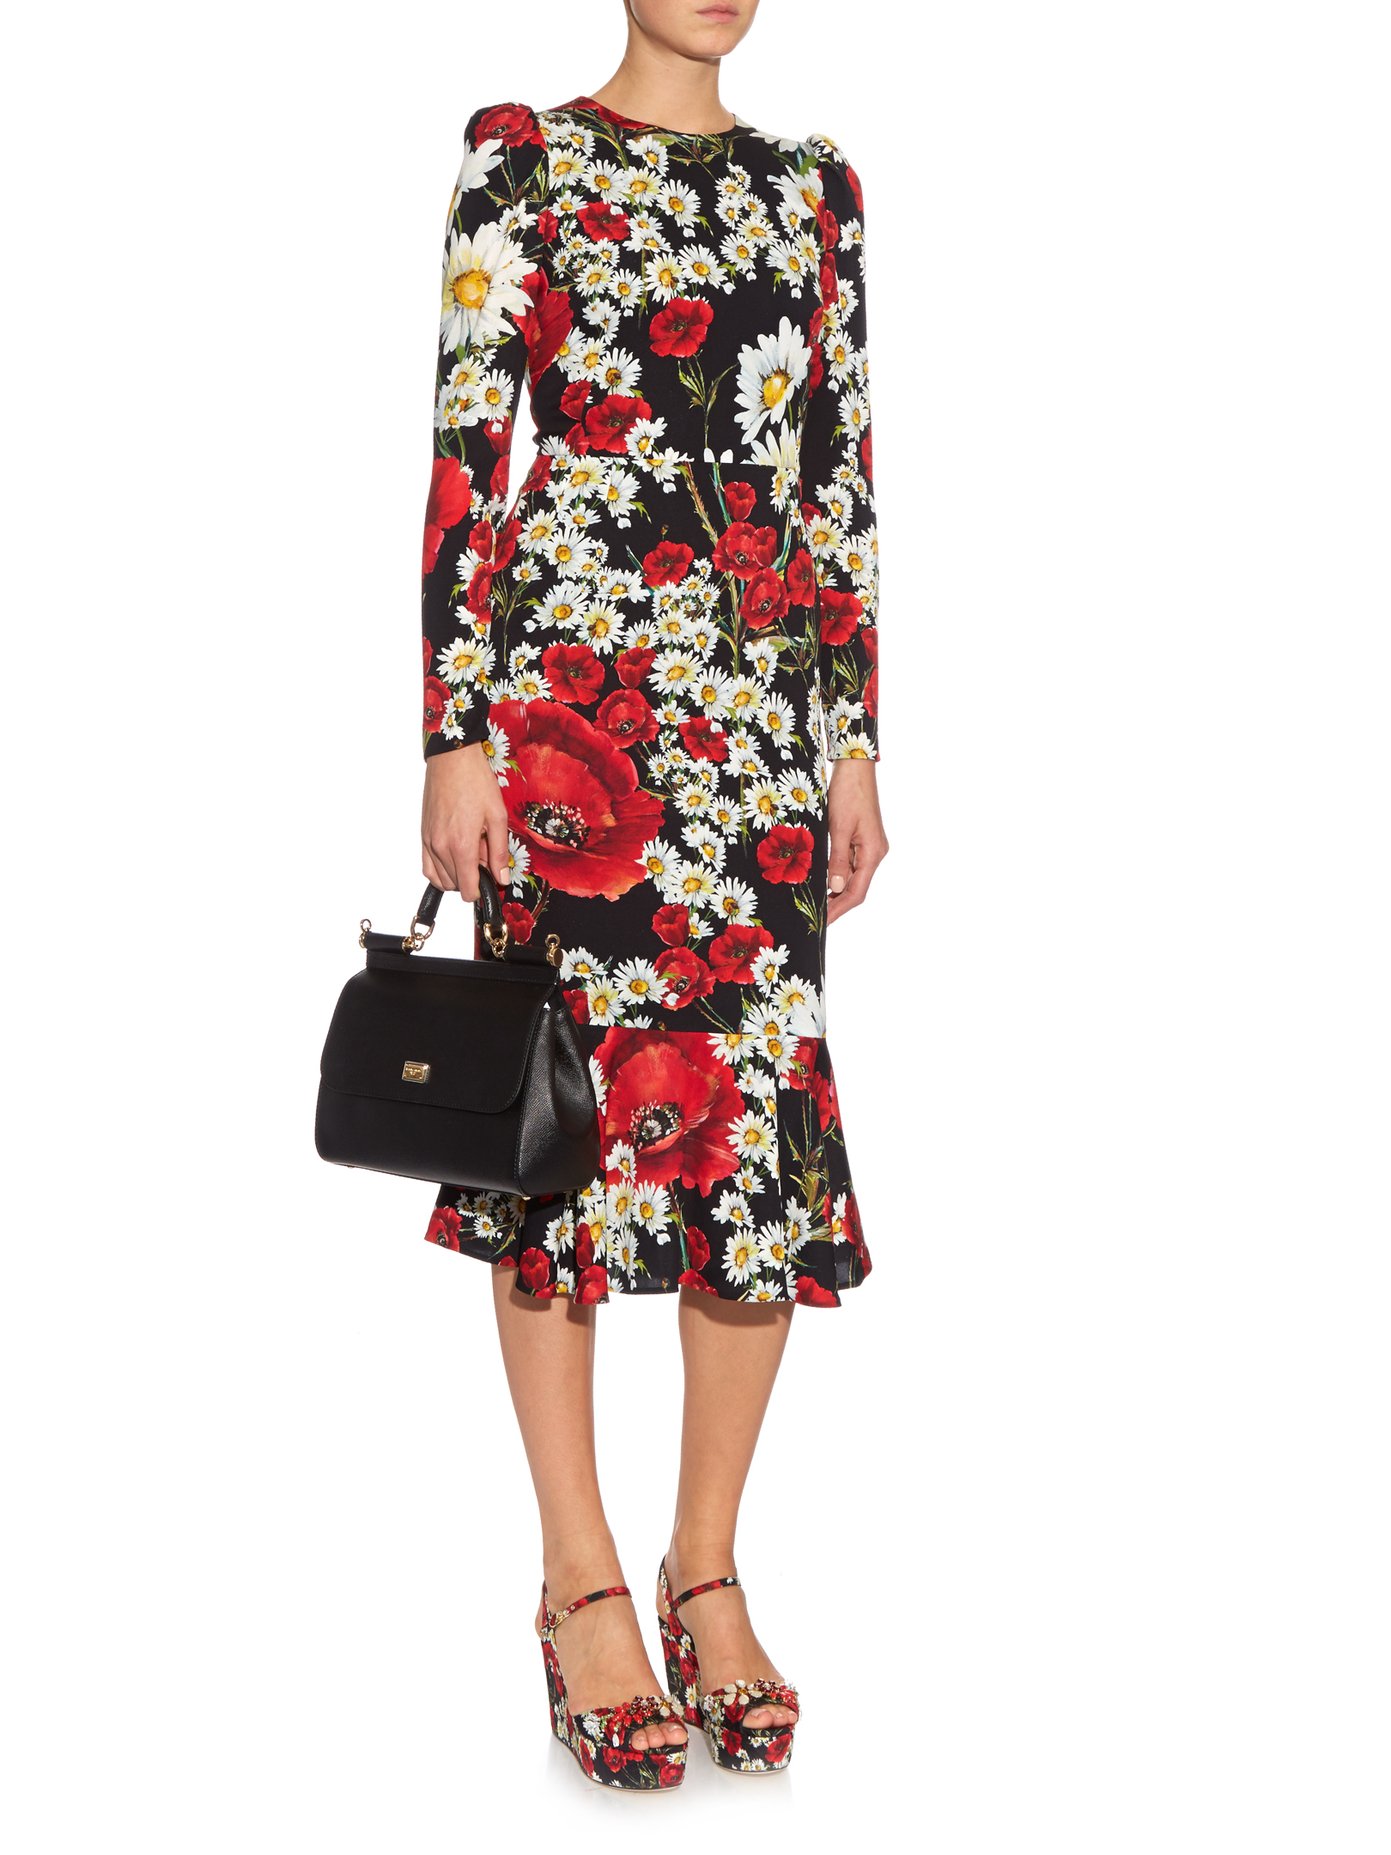 Red and White Poppy and Daisy Print Dress by Dolce & Gabbana